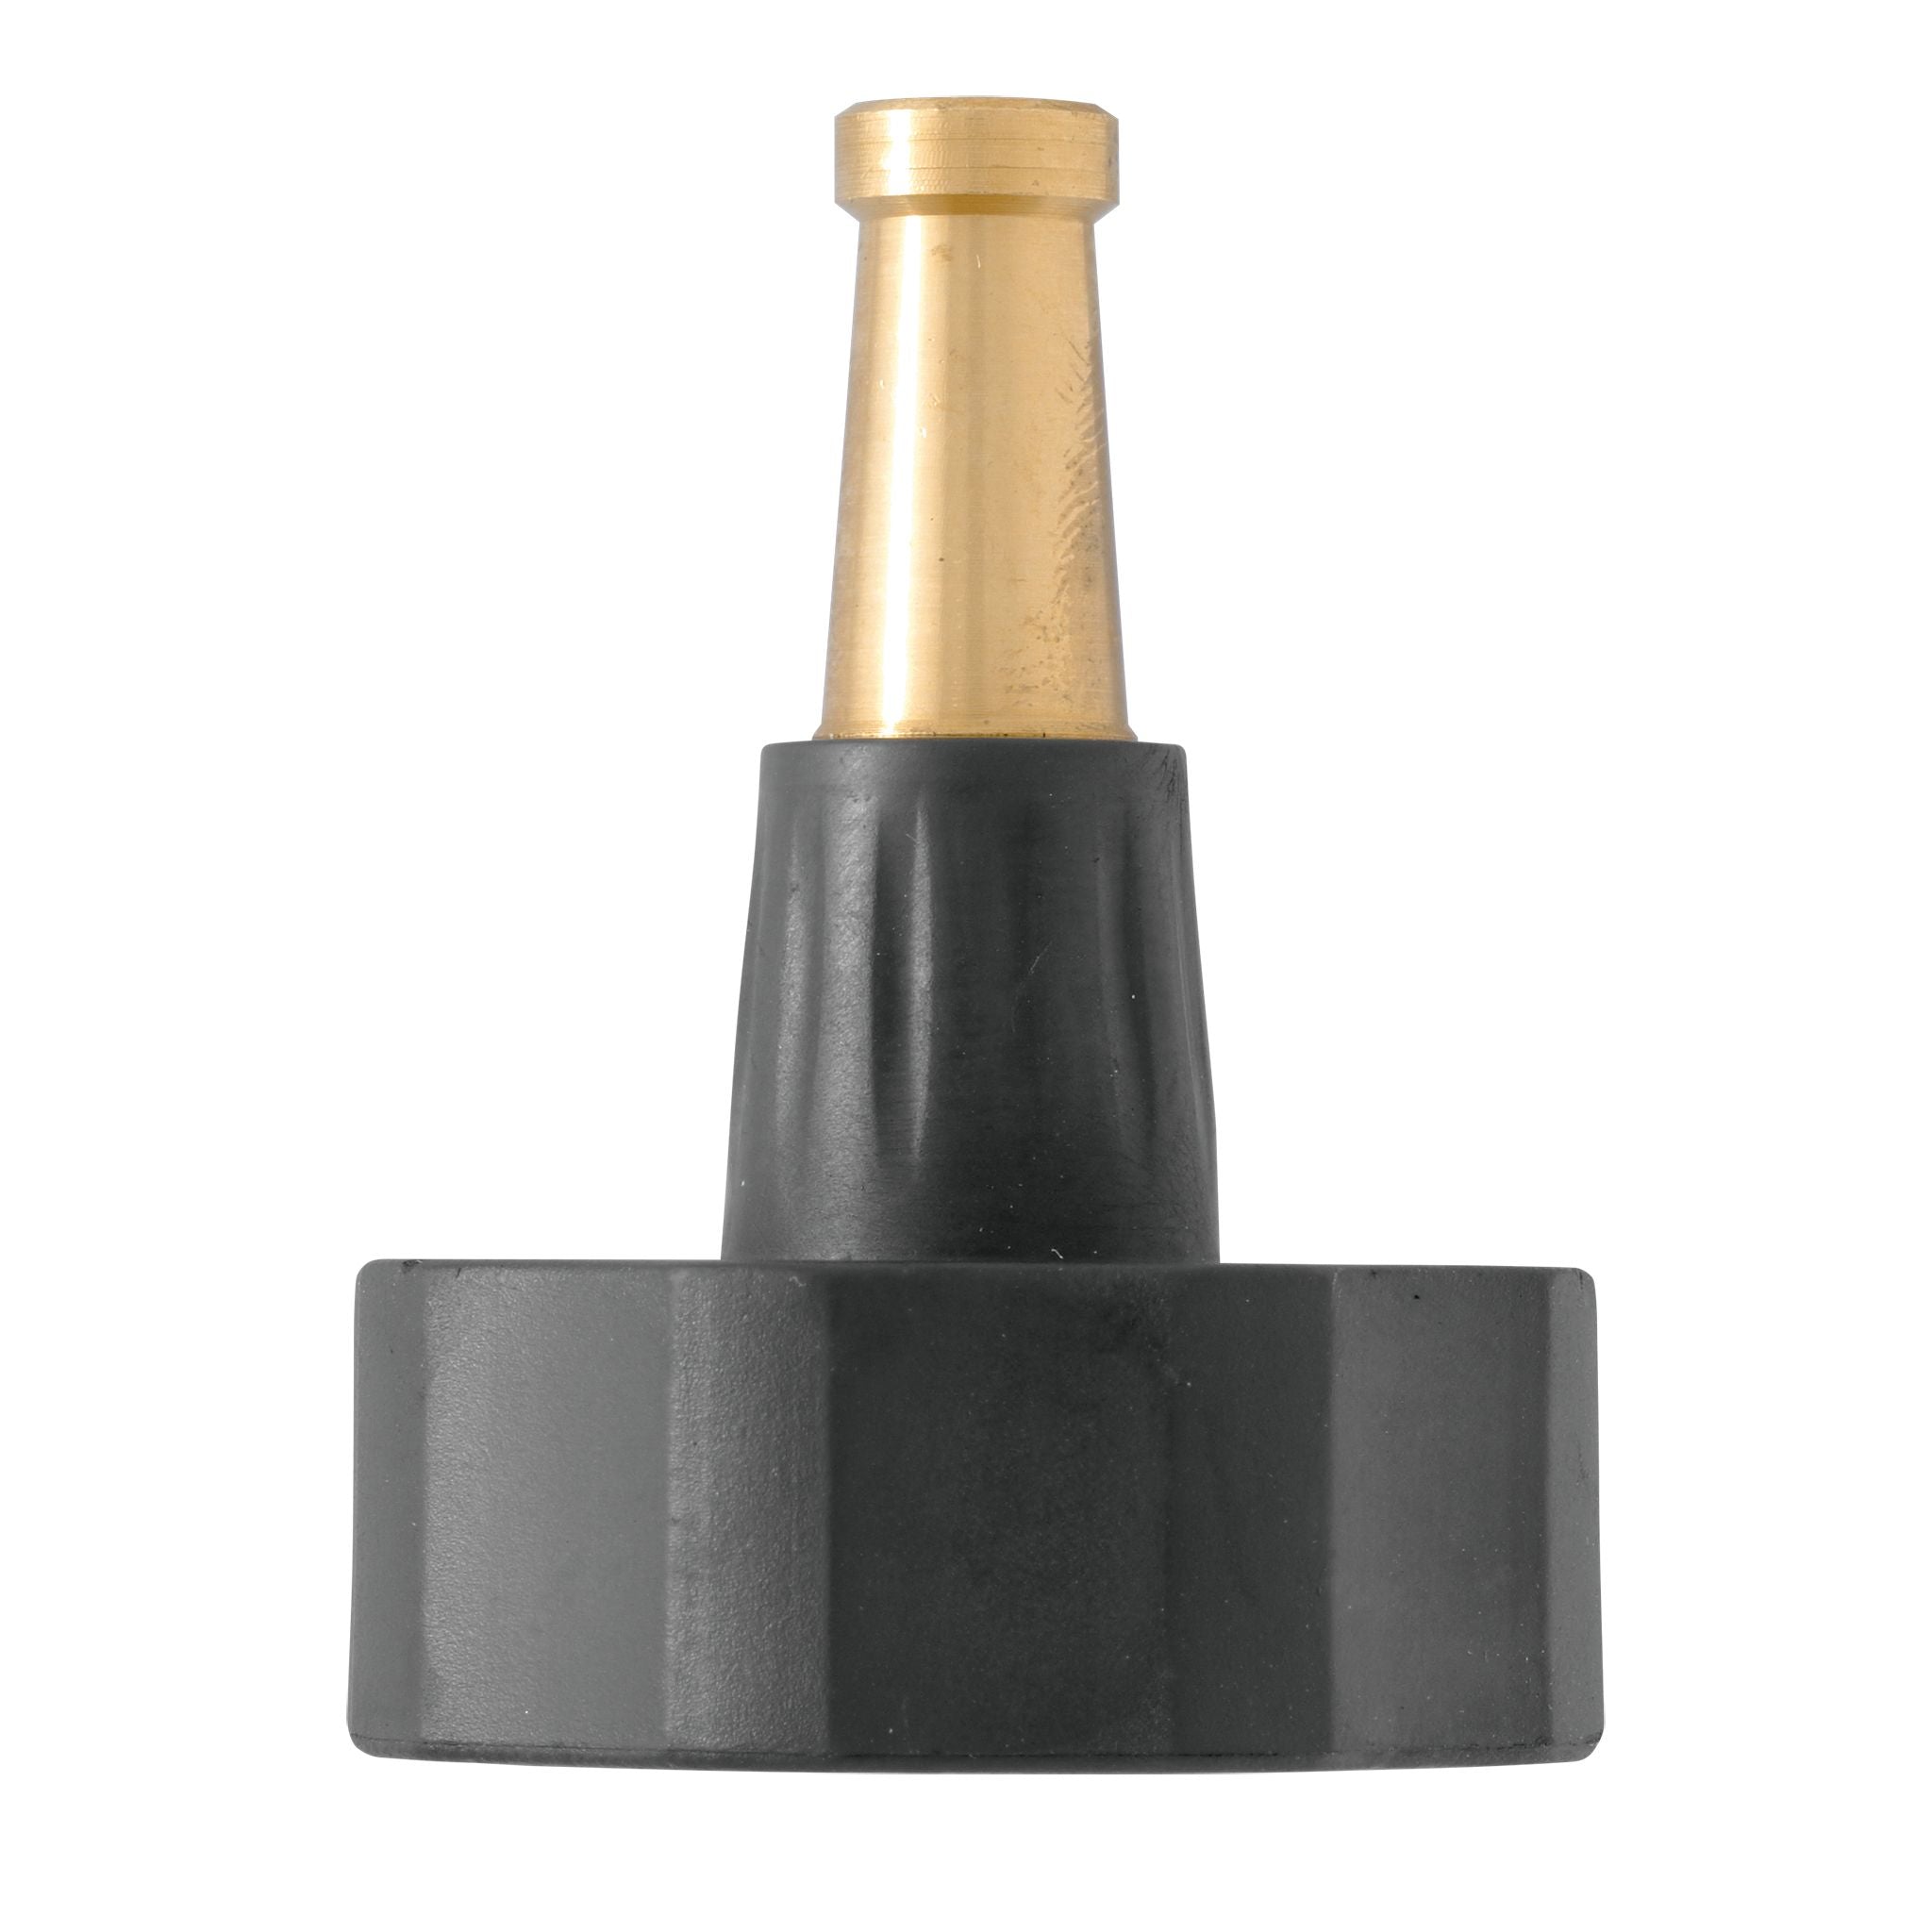 Brass Garden Long Sweeper Solid Tip Nozzle